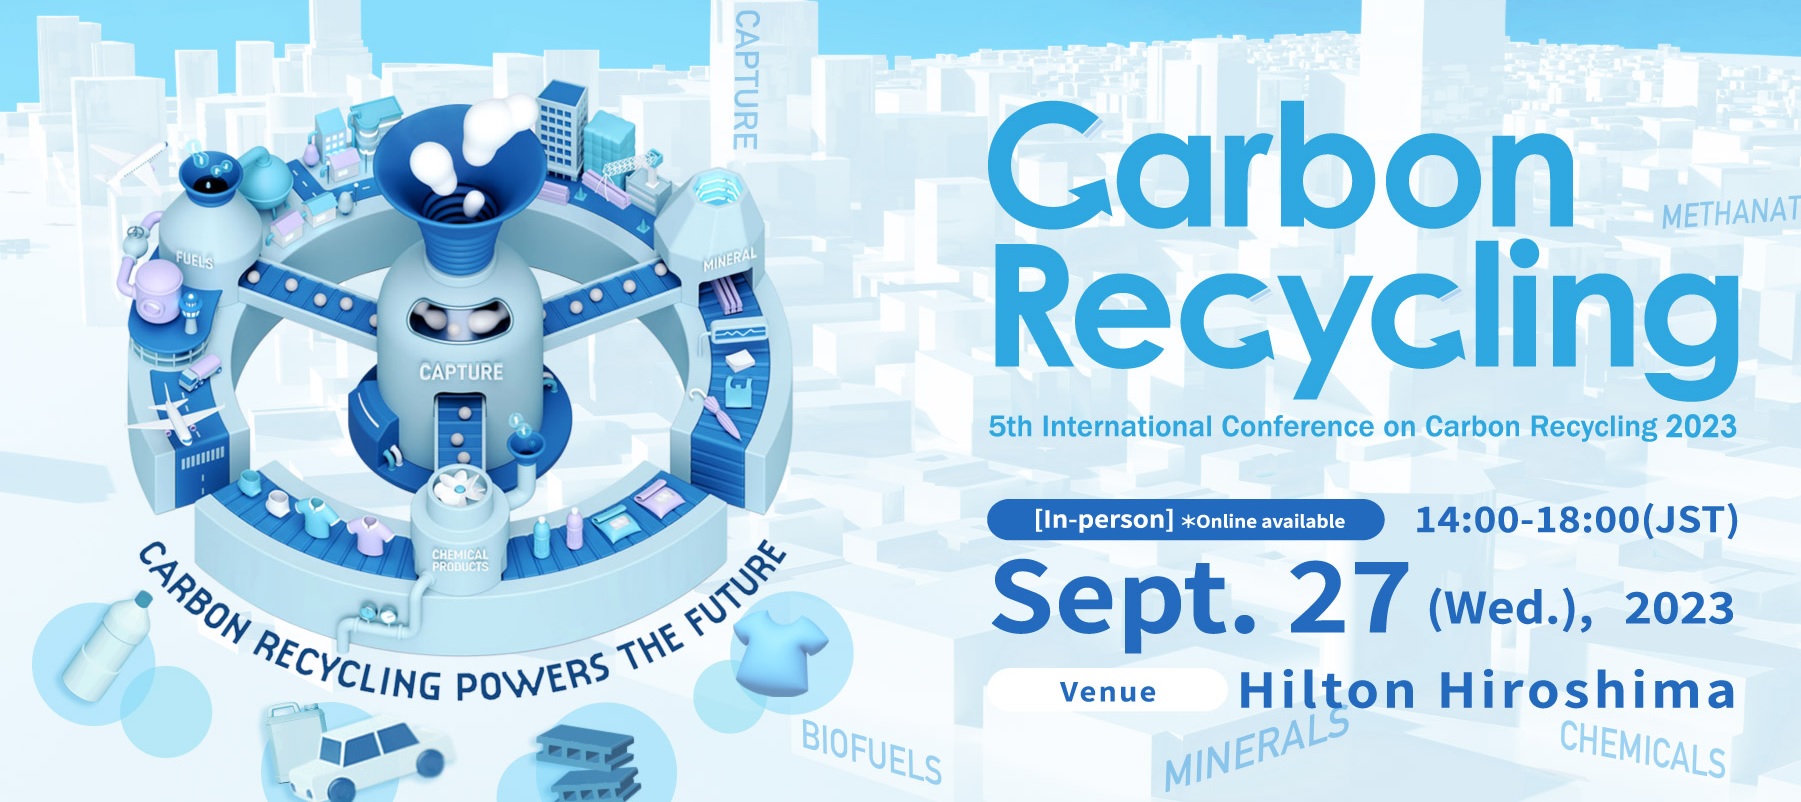  5th International Conference on Carbon Recycling 2023